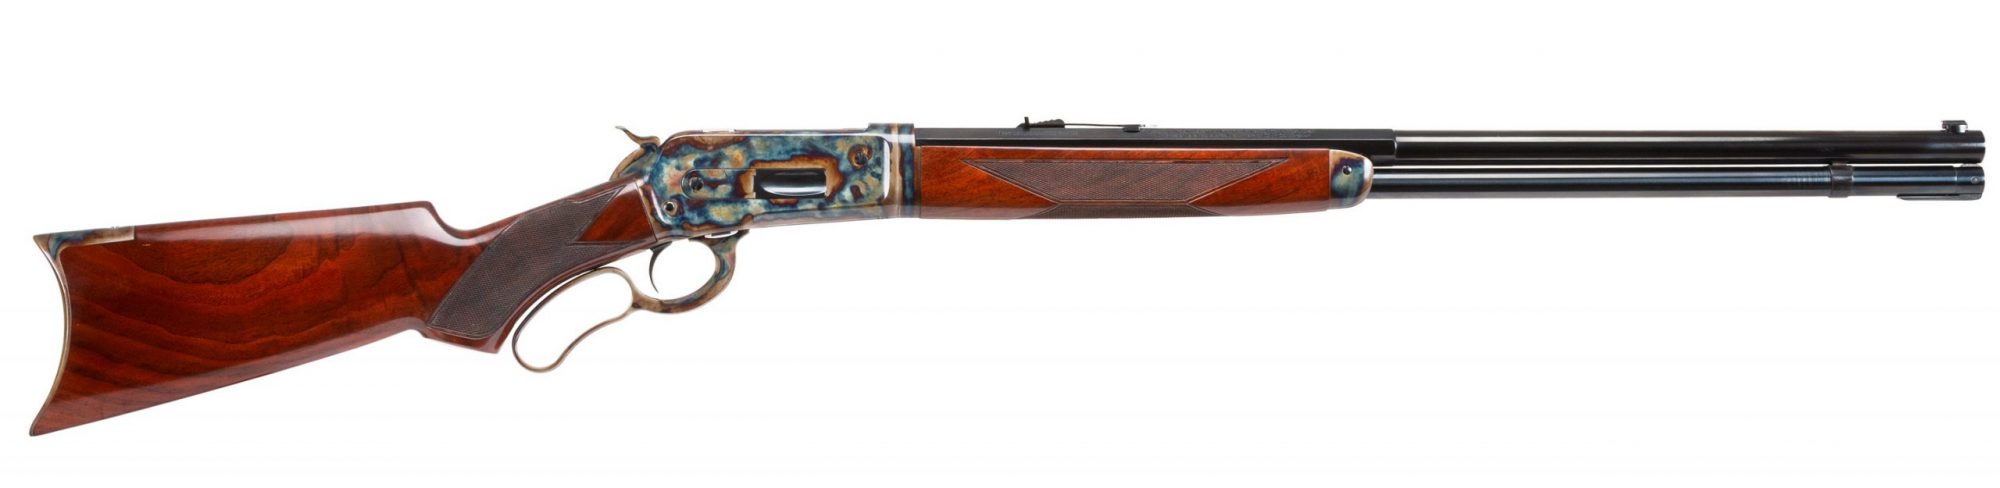 Photo of a late model Winchester 1886 featuring Turnbull Restoration finishes including color case hardening